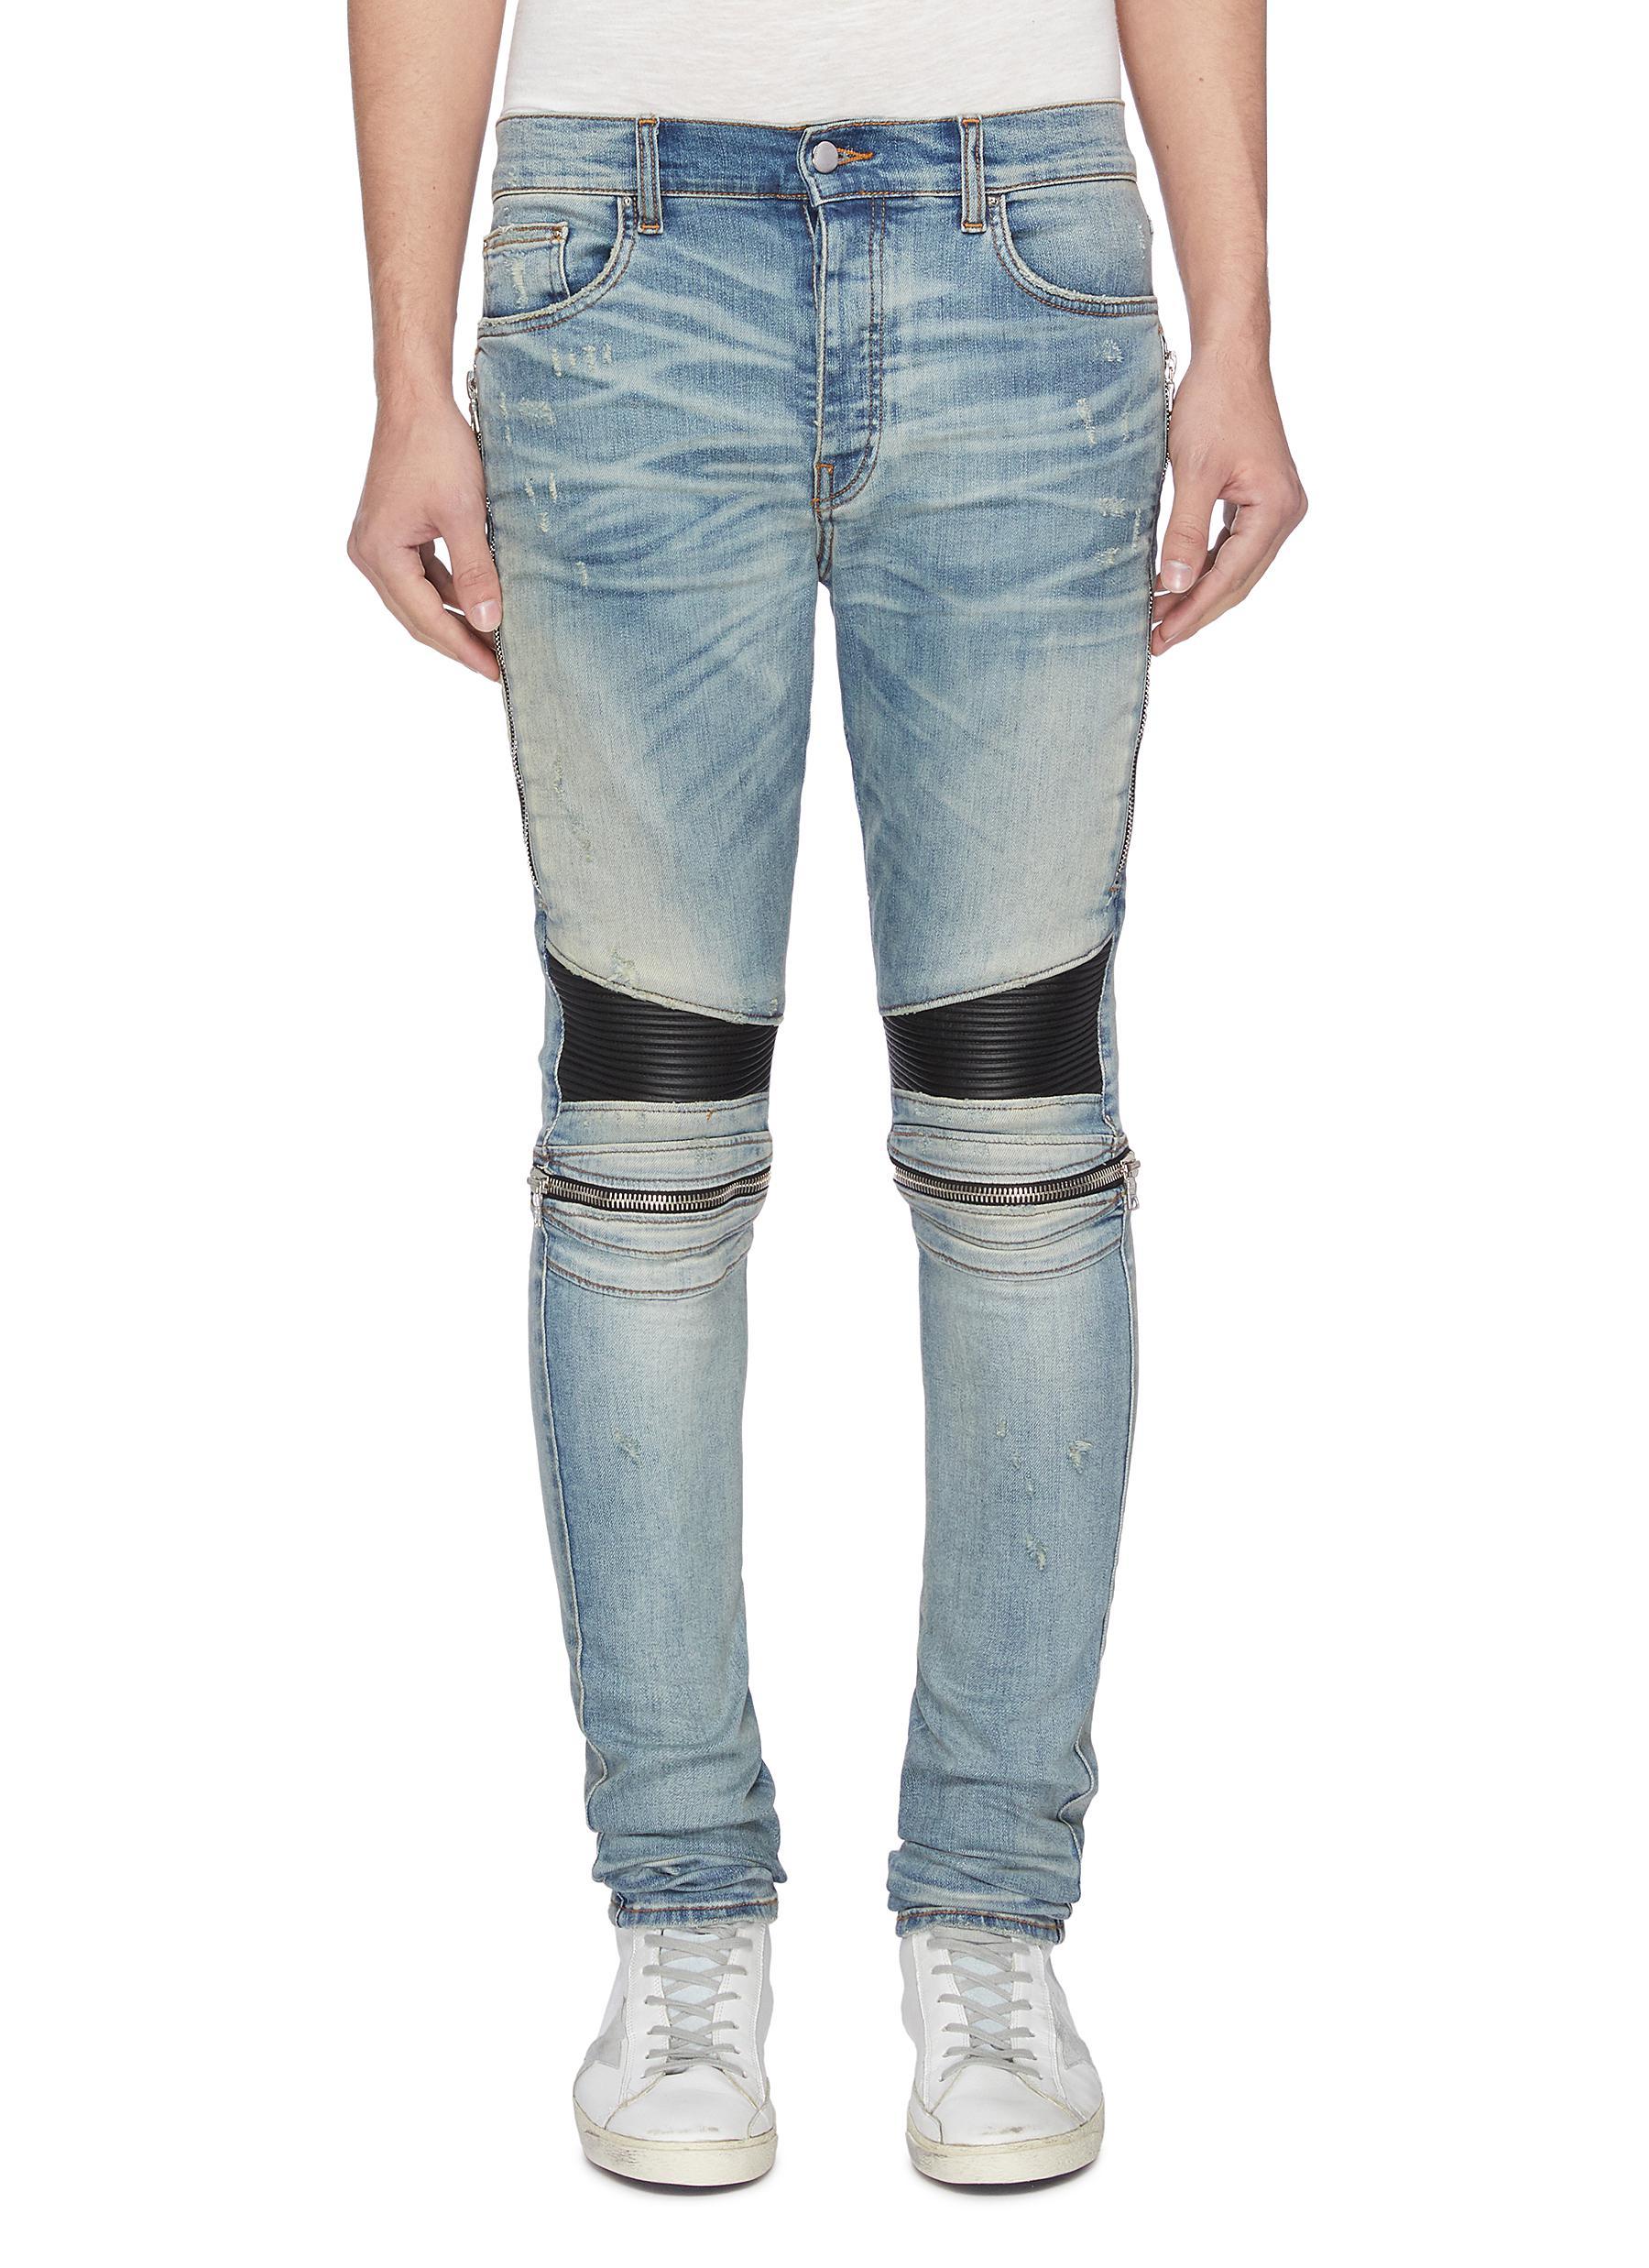 Amiri 'mx2' Pleated Leather Patch Jeans in Blue for Men - Lyst